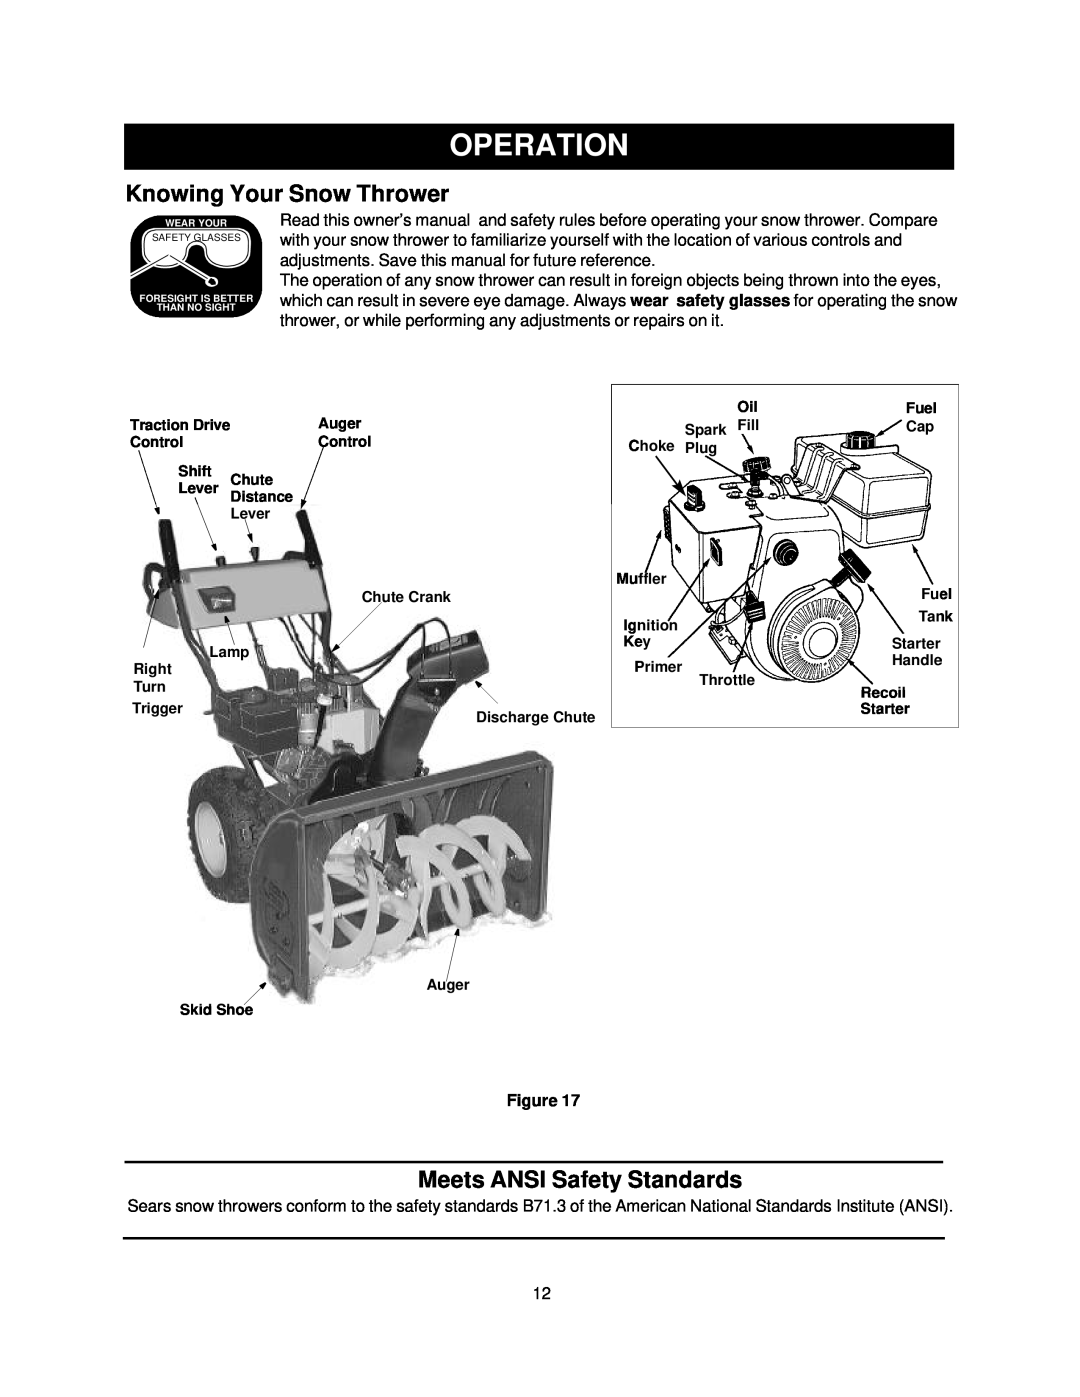 Sears 247.88852 owner manual Operation, Knowing Your Snow Thrower, Meets ANSI Safety Standards 